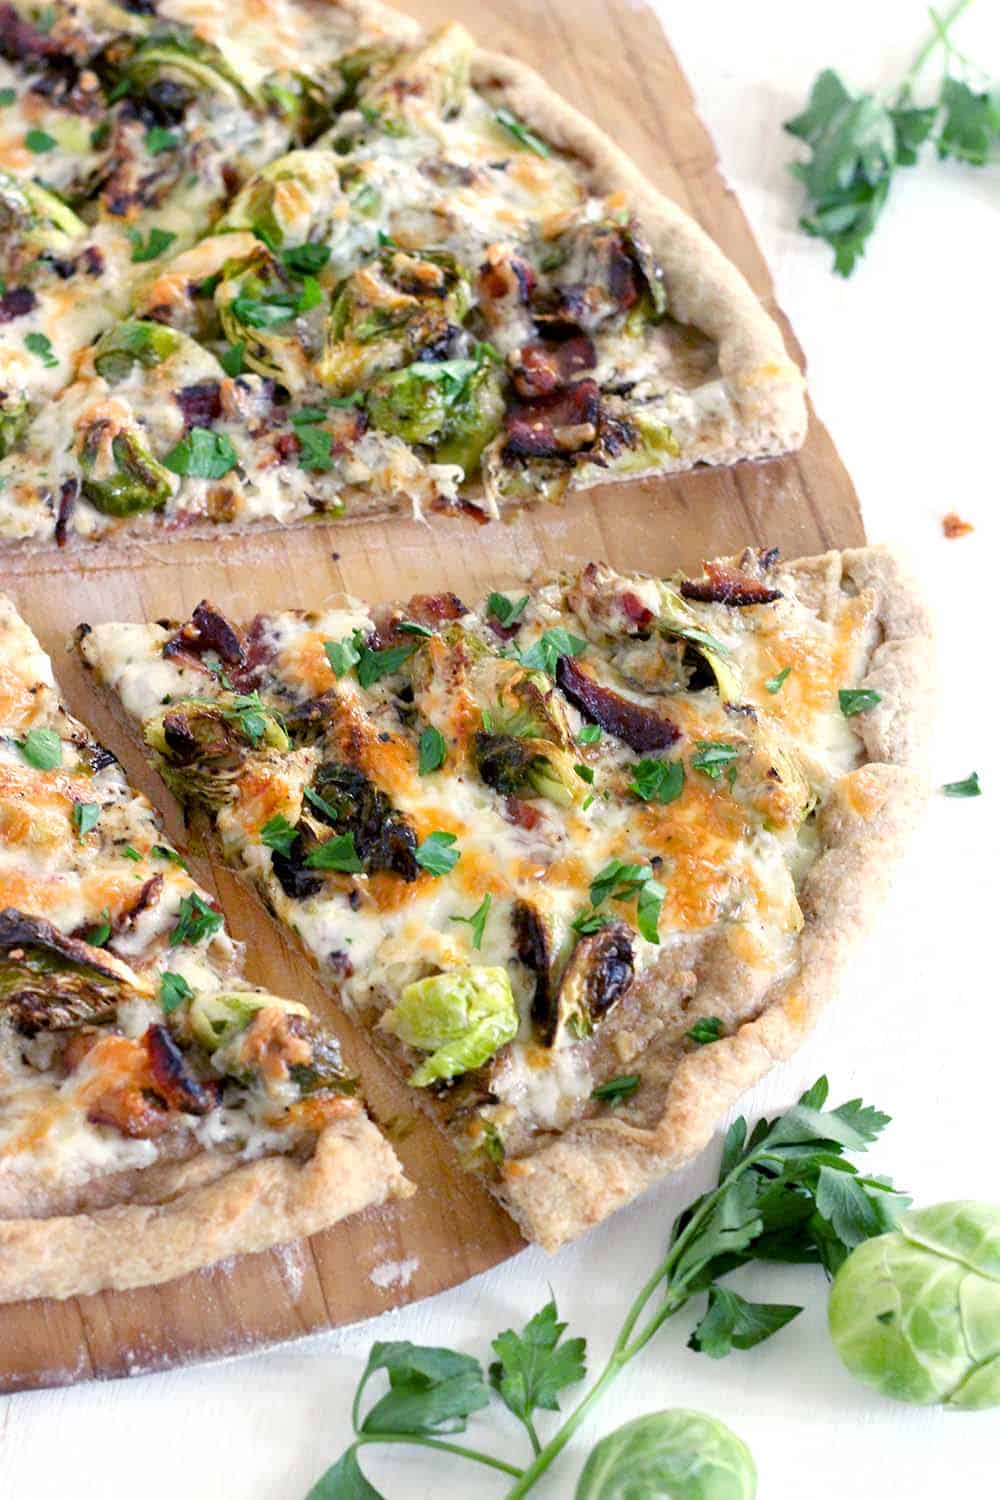 Brussels Sprout and Bacon Pizza is a match made in heaven and a FOUR INGREDIENT recipe! A white pie with seared brussels sprouts, crunchy bacon, and mozzarella cheese baked on a cast iron pizza pan until bubbly with a whole wheat crust. YUM.